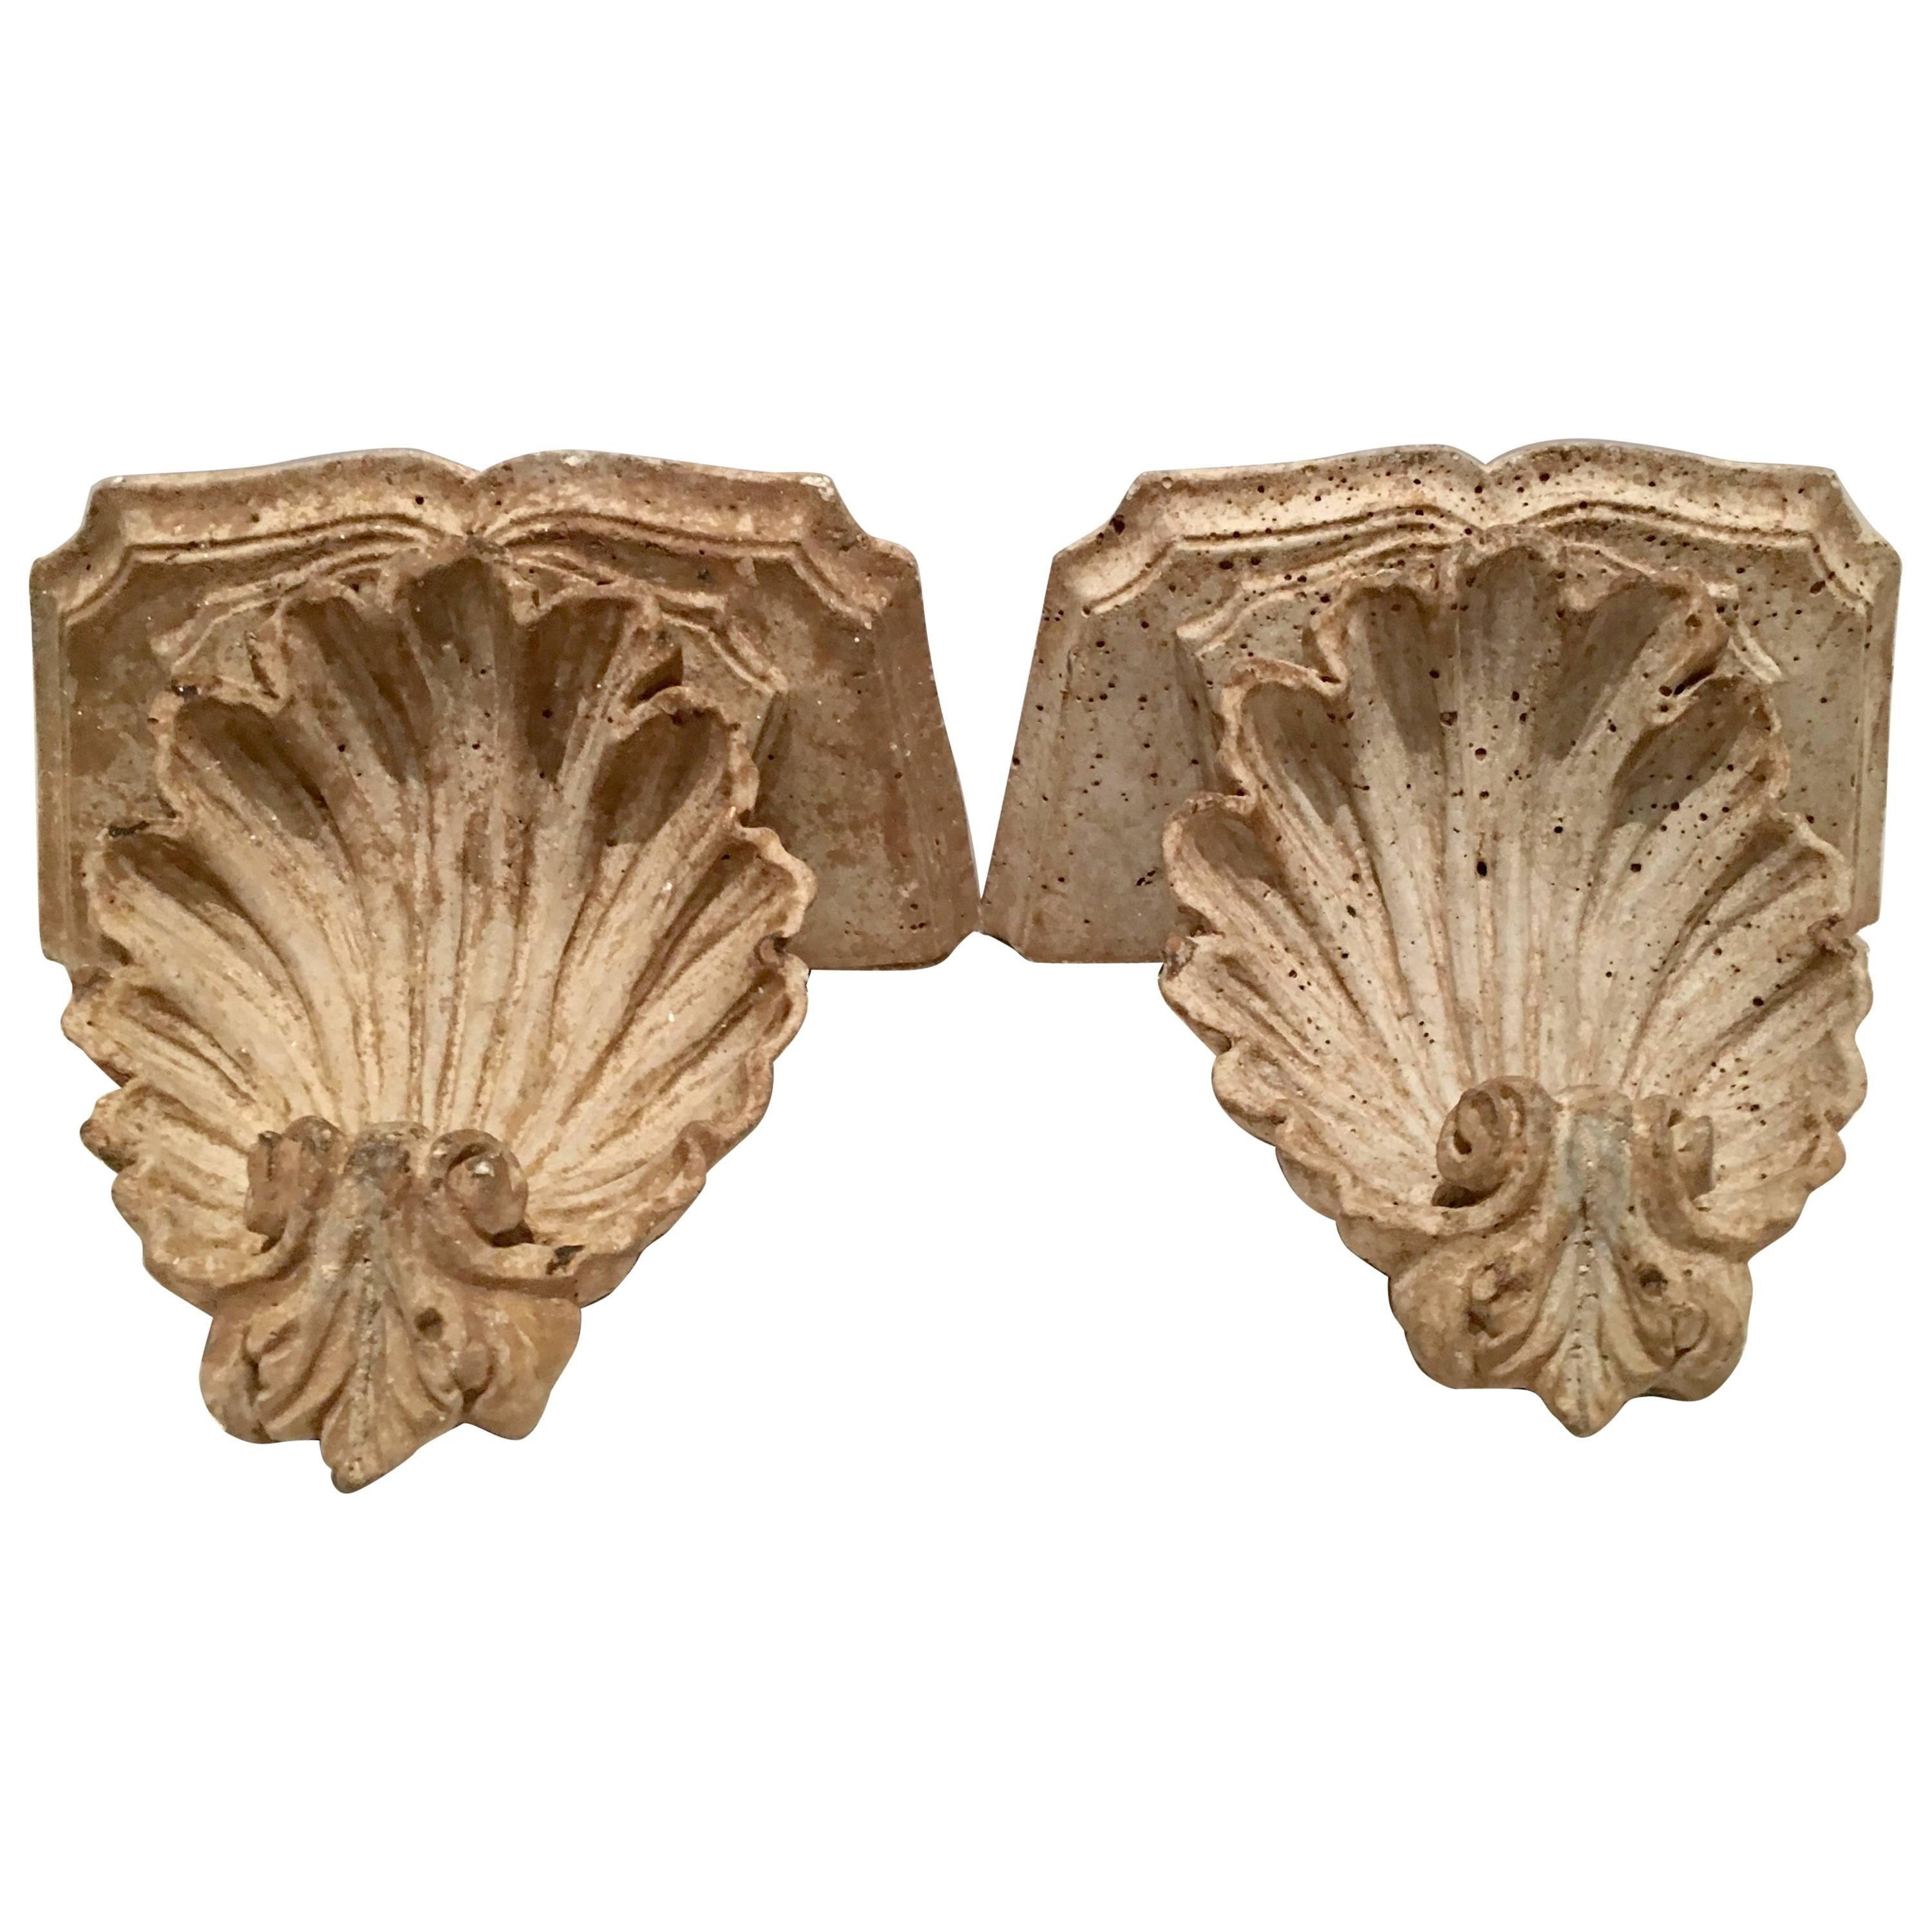 20th Century Pair Of Cast Stone Architectural Scallop Shell Corbel Wall Brackets